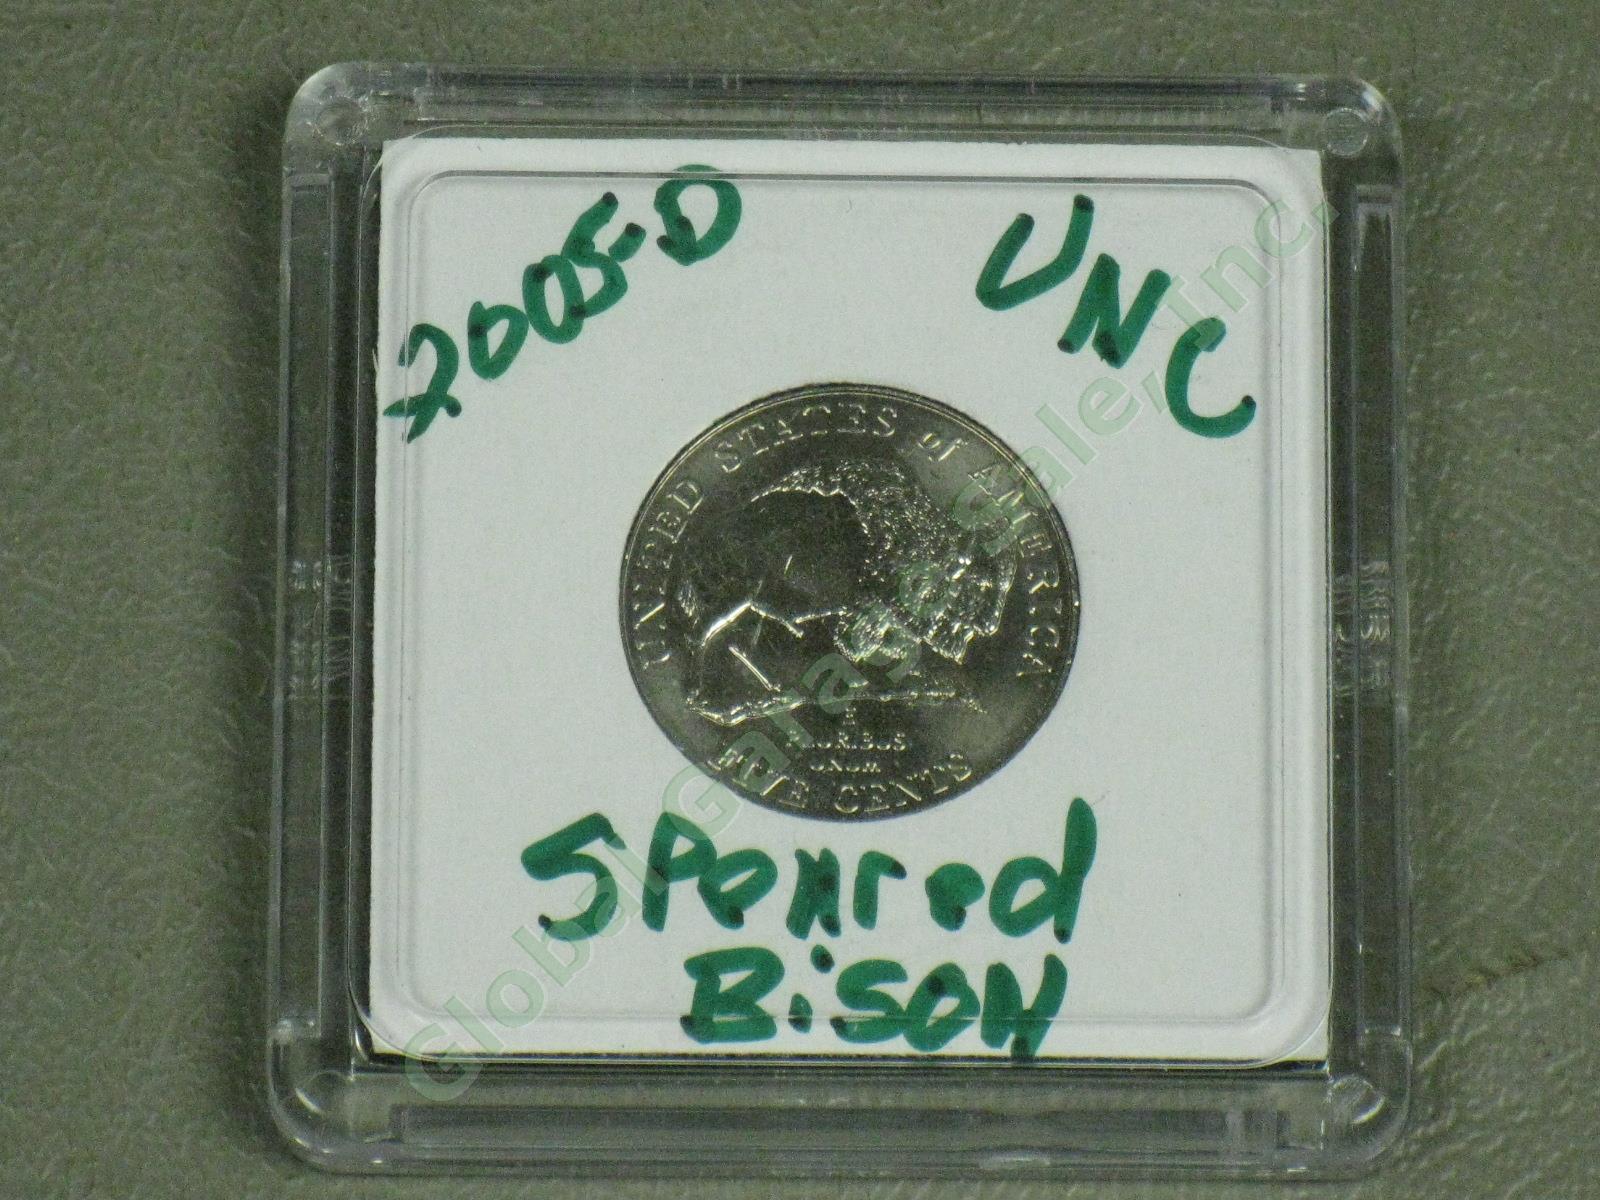 UNC 2005-D Speared Bison Buffalo US Jefferson Nickel Rare Full Spear NO RESERVE!